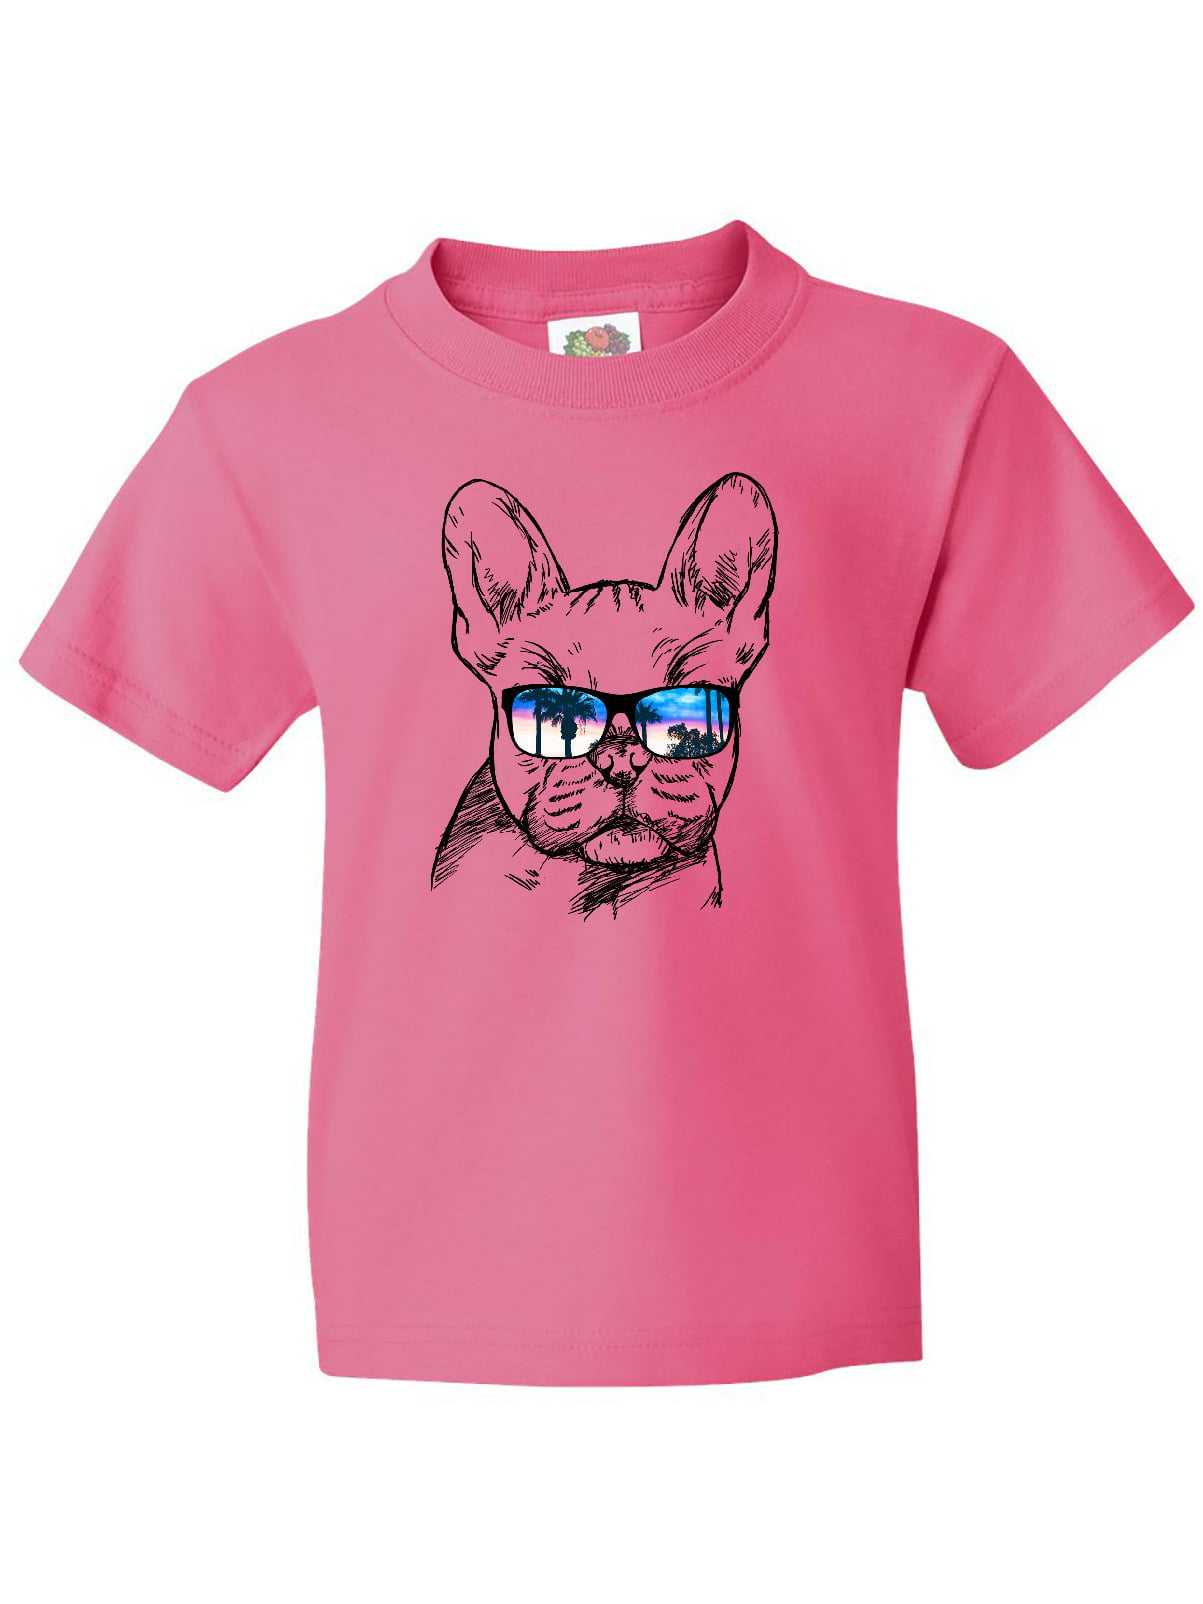 Kids French Bulldog T-Shirt Unisex Children to Adult Cute Youth Boys Neon Puppy